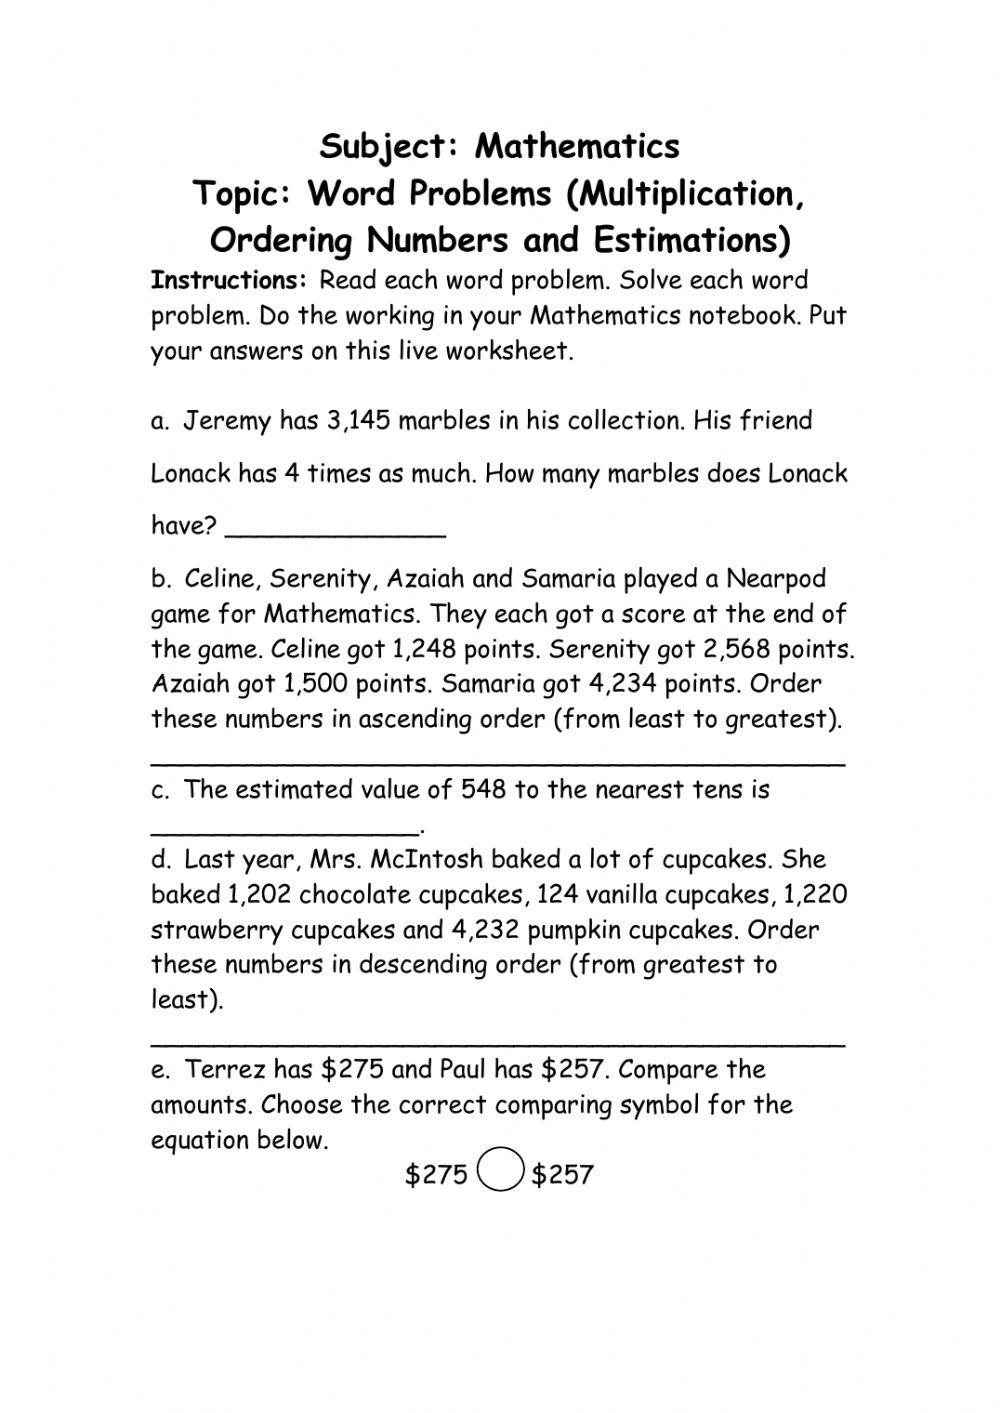 Word Problems Multiplication Ordering Numbers Estimations